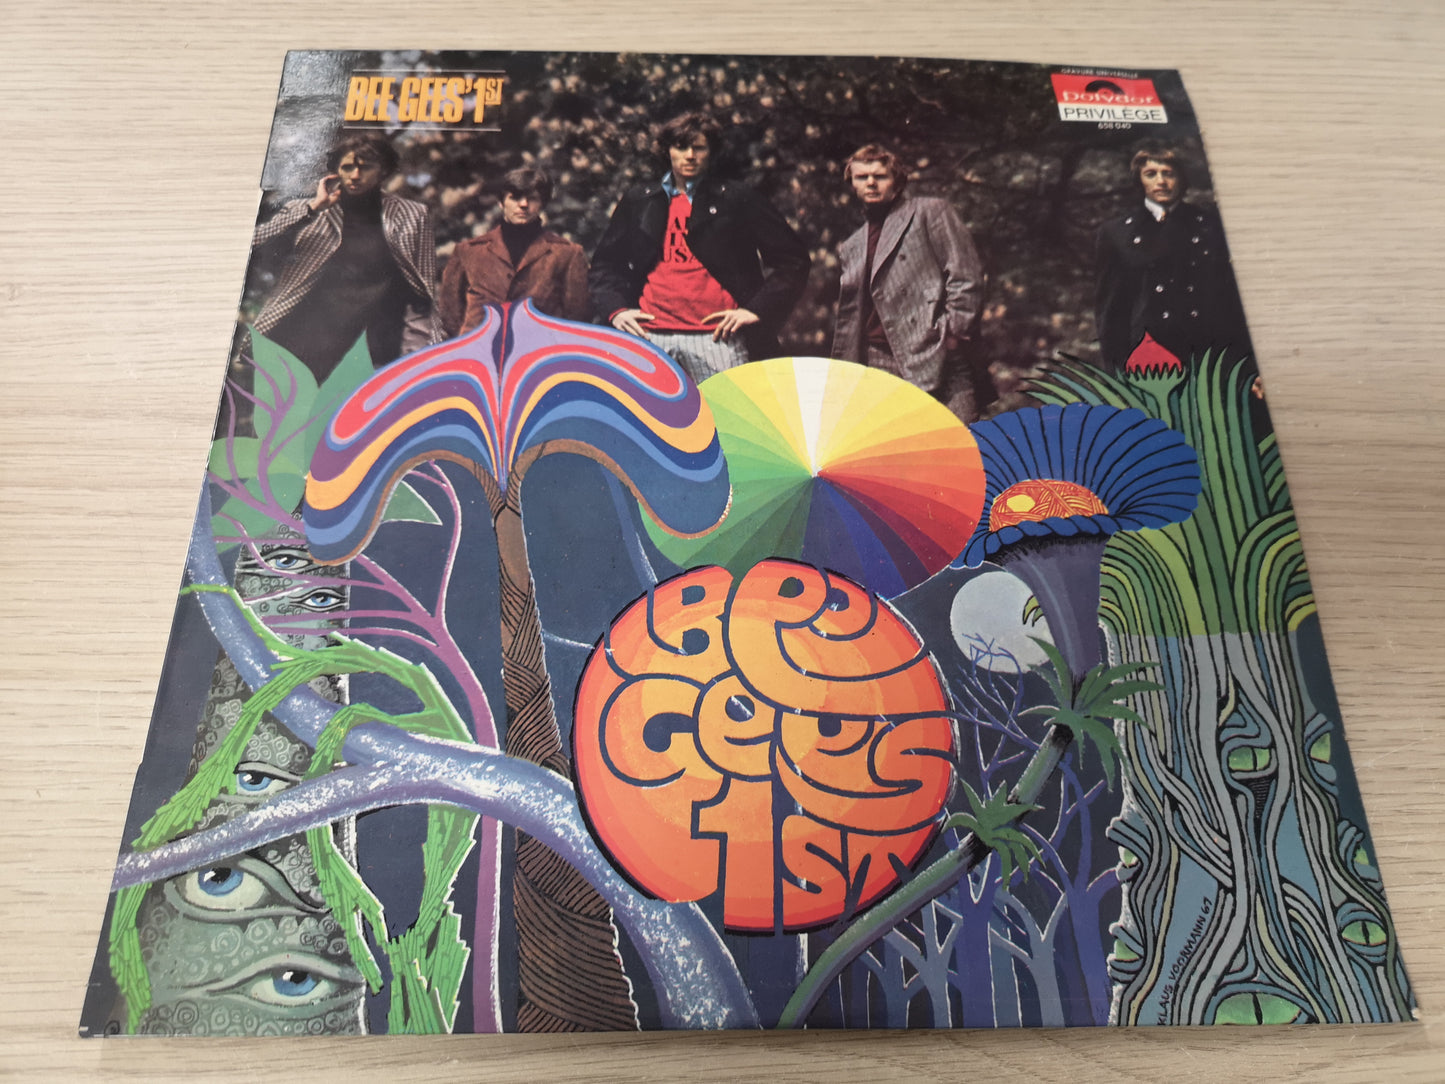 Bee Gees "1st" Orig France 1968 VG++/VG++ "Holiday"